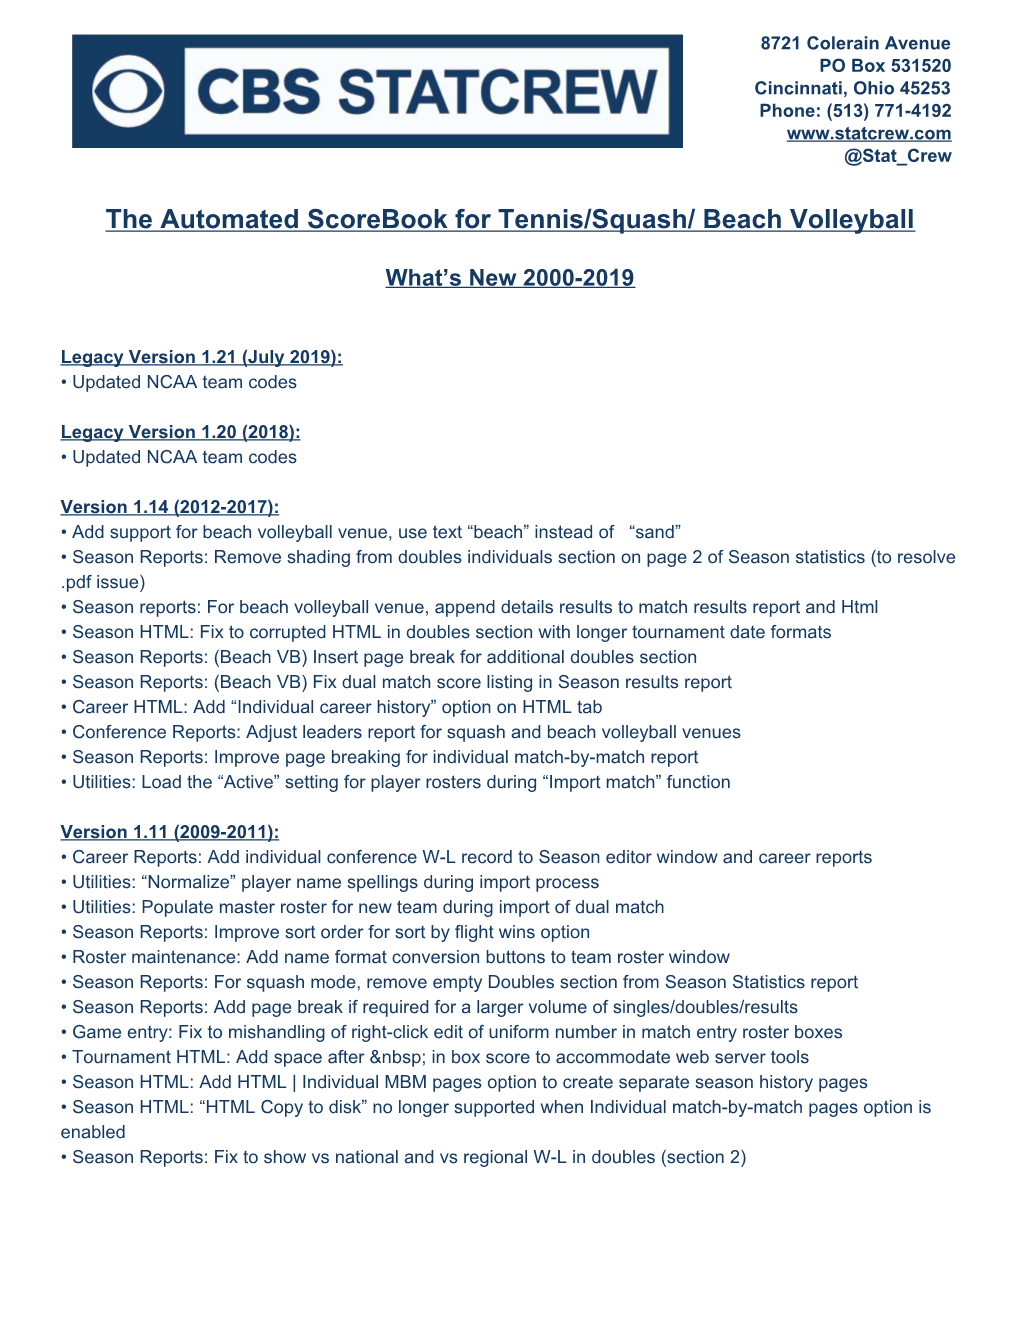 The Automated Scorebook for Tennis/Squash/ Beach Volleyball